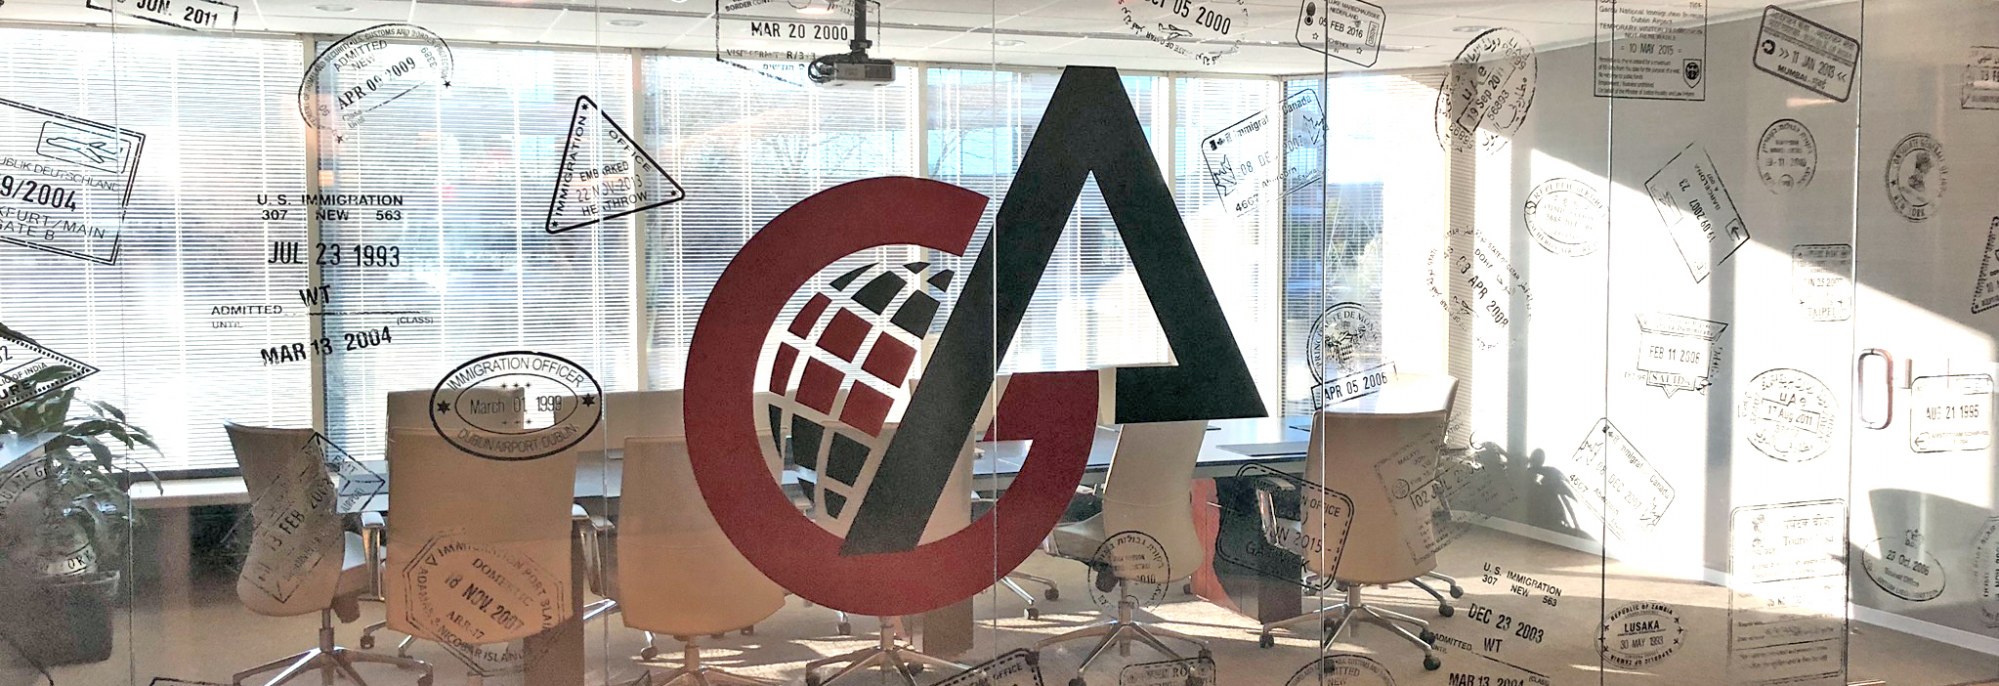 A picture looking through the glass into a large conference room. The glass has visa date stamps and the Goel & Anderson logo styled onto it